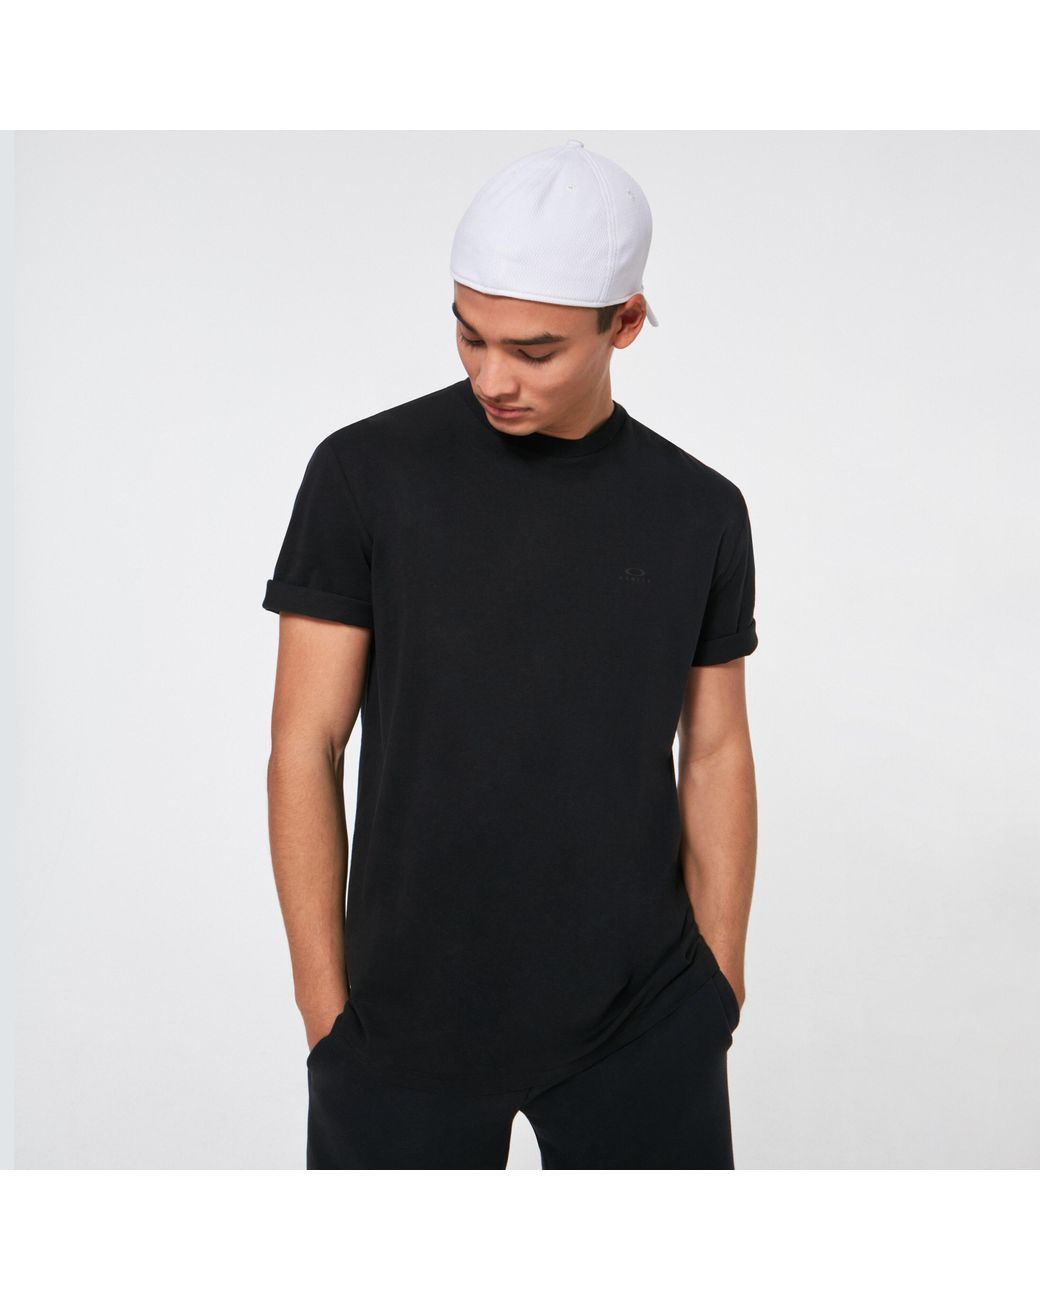 Oakley Cotton Relaxed Short Sleeve Tee in Black for Men - Lyst